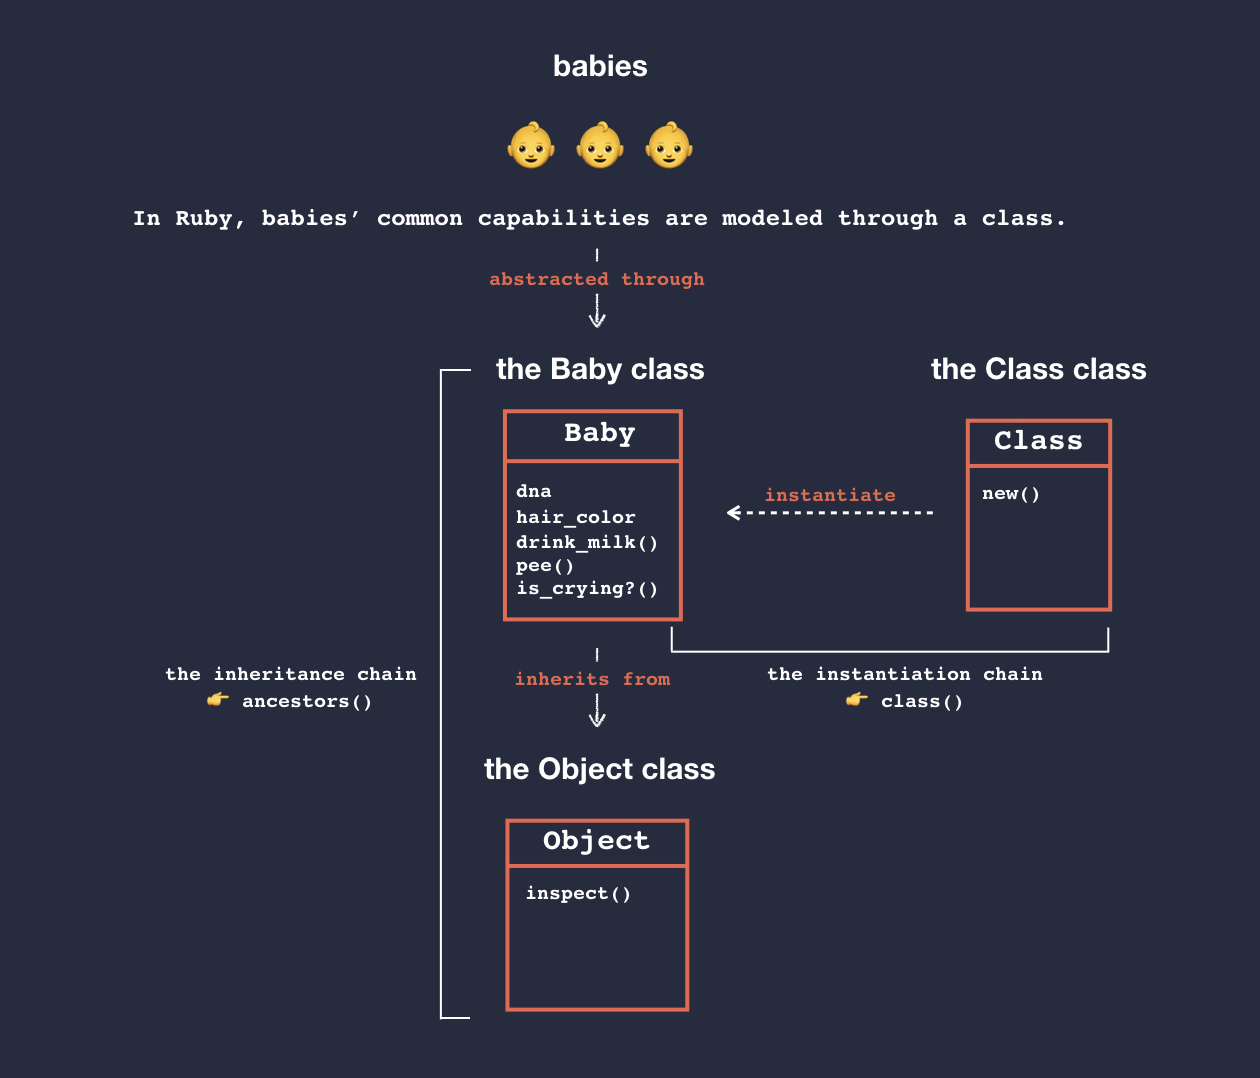 a schema explaining how babies common data types and behaviors can be modeled through a Ruby class, which inherits from the root Object class, but also benefits from the Class class instance methods